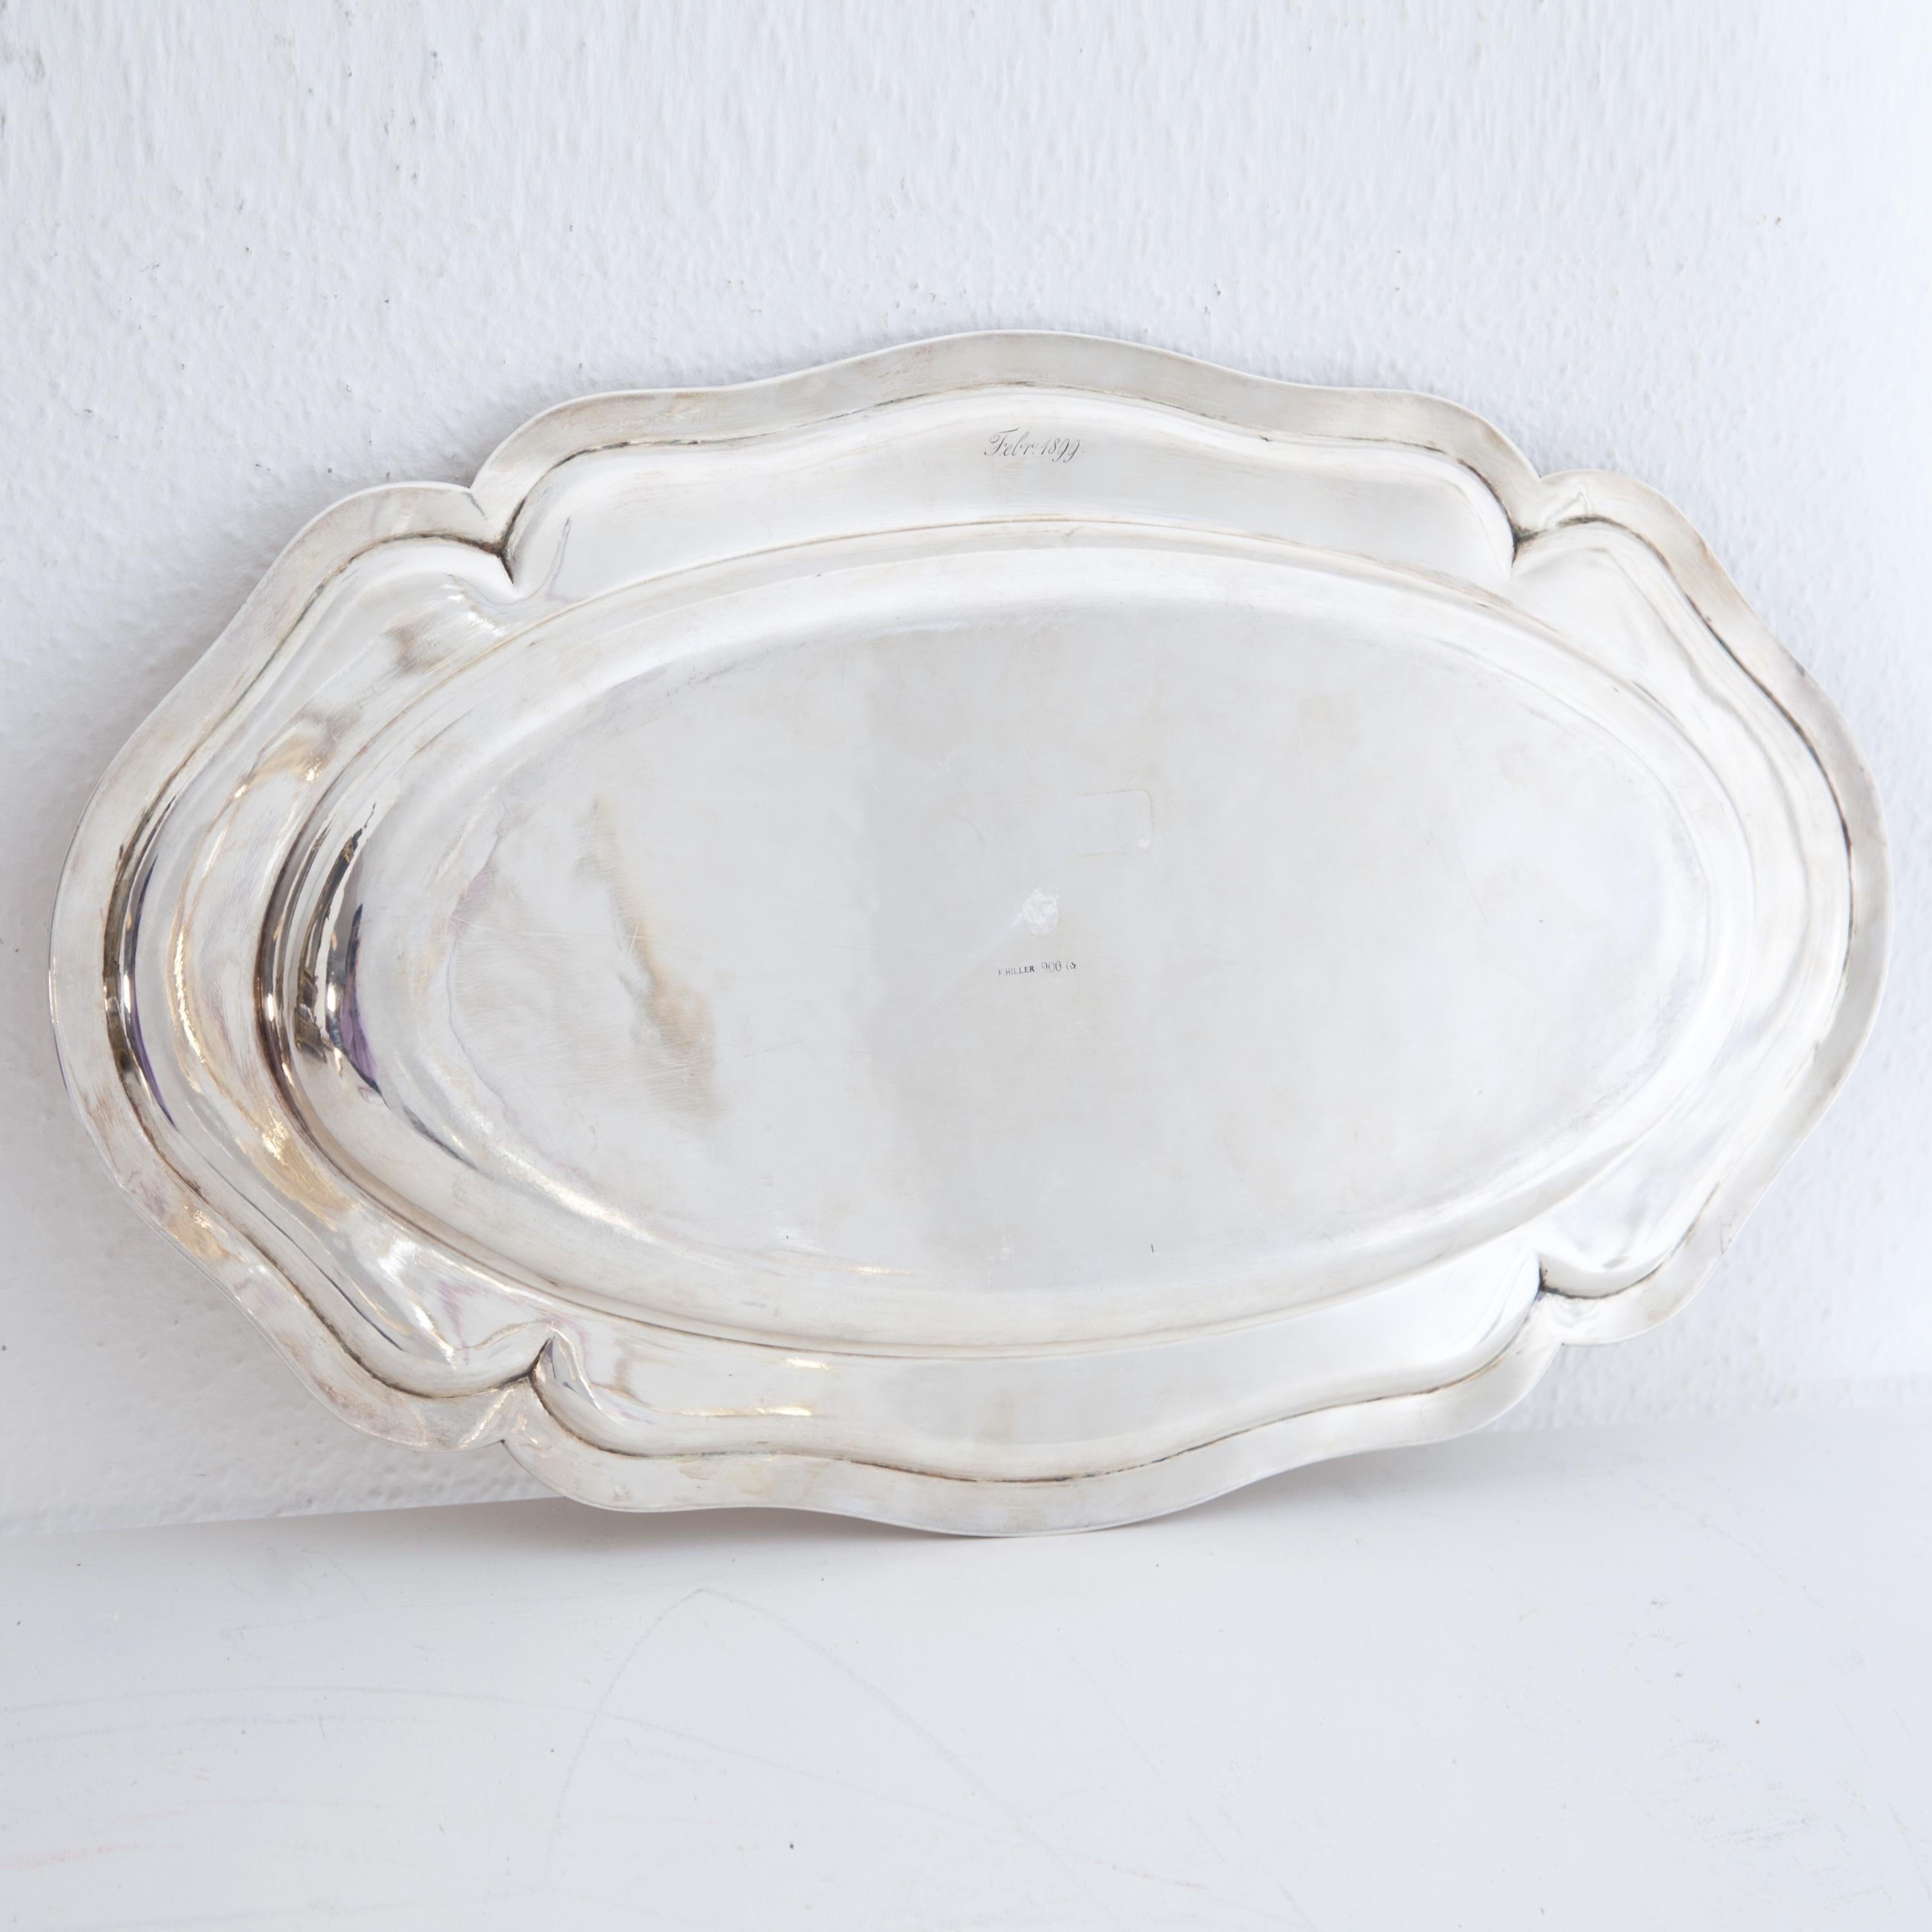 Late 19th Century Silver 900 Serving Plate, Marked F. Hiller, Germany, 1899